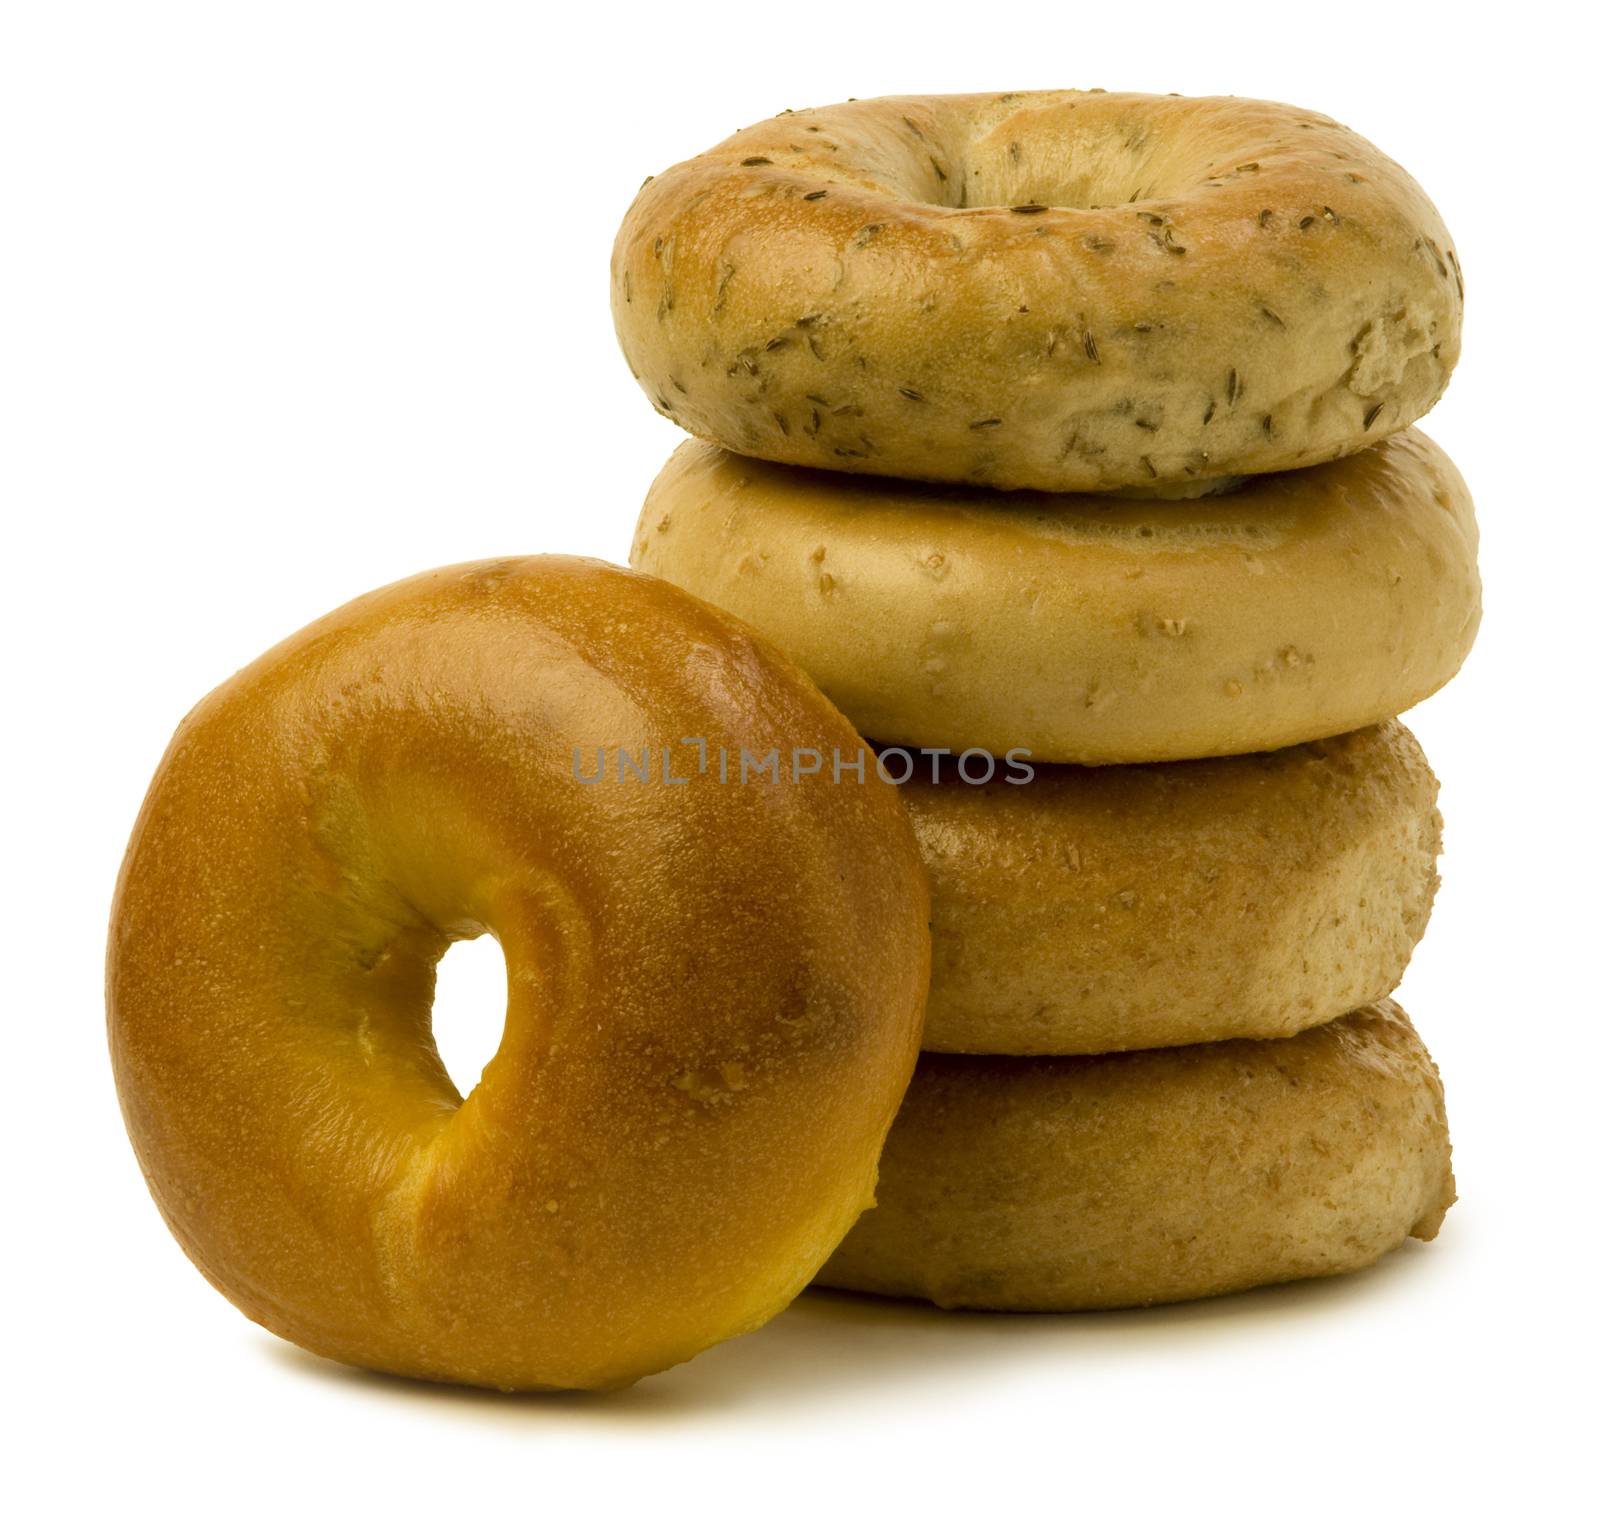 Stack of four bagels with one leaning on the side against white background.